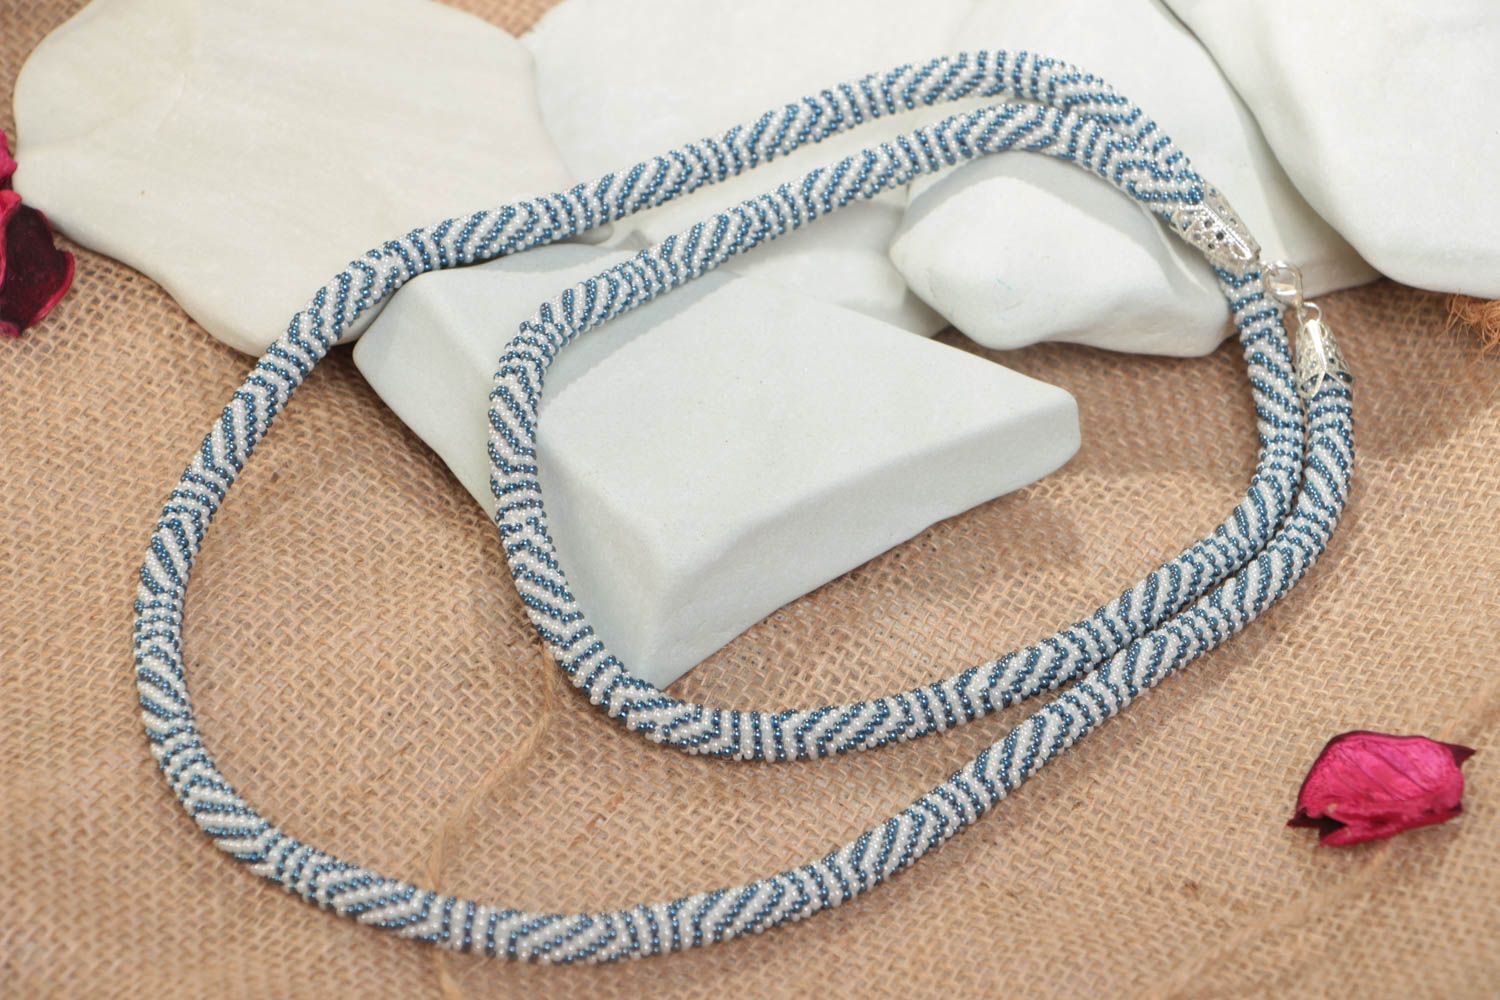 Handmade long white and blue striped beaded cord necklace for stylish women photo 1